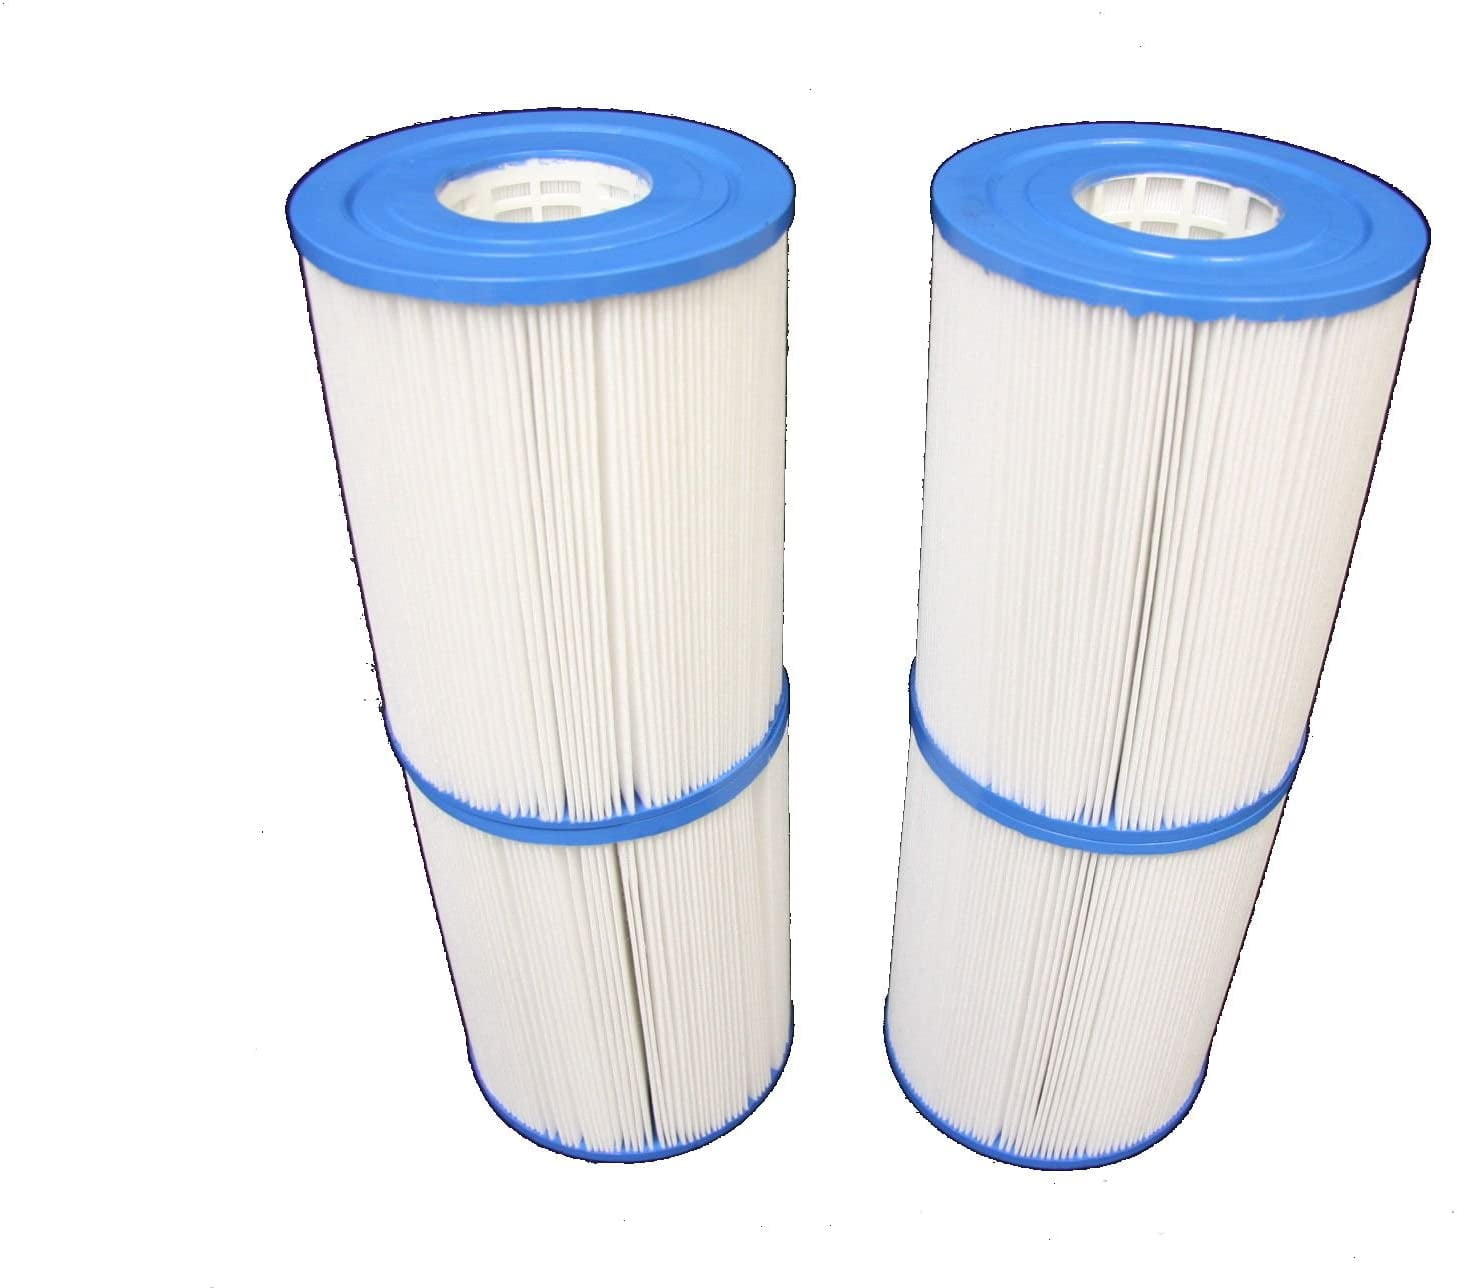 FC-6110 C-7685 SpiroPure Pool Spa Filter Replacement for Harmsco TFC-105 / BF-105 / SC/TC 105 PH105-4 